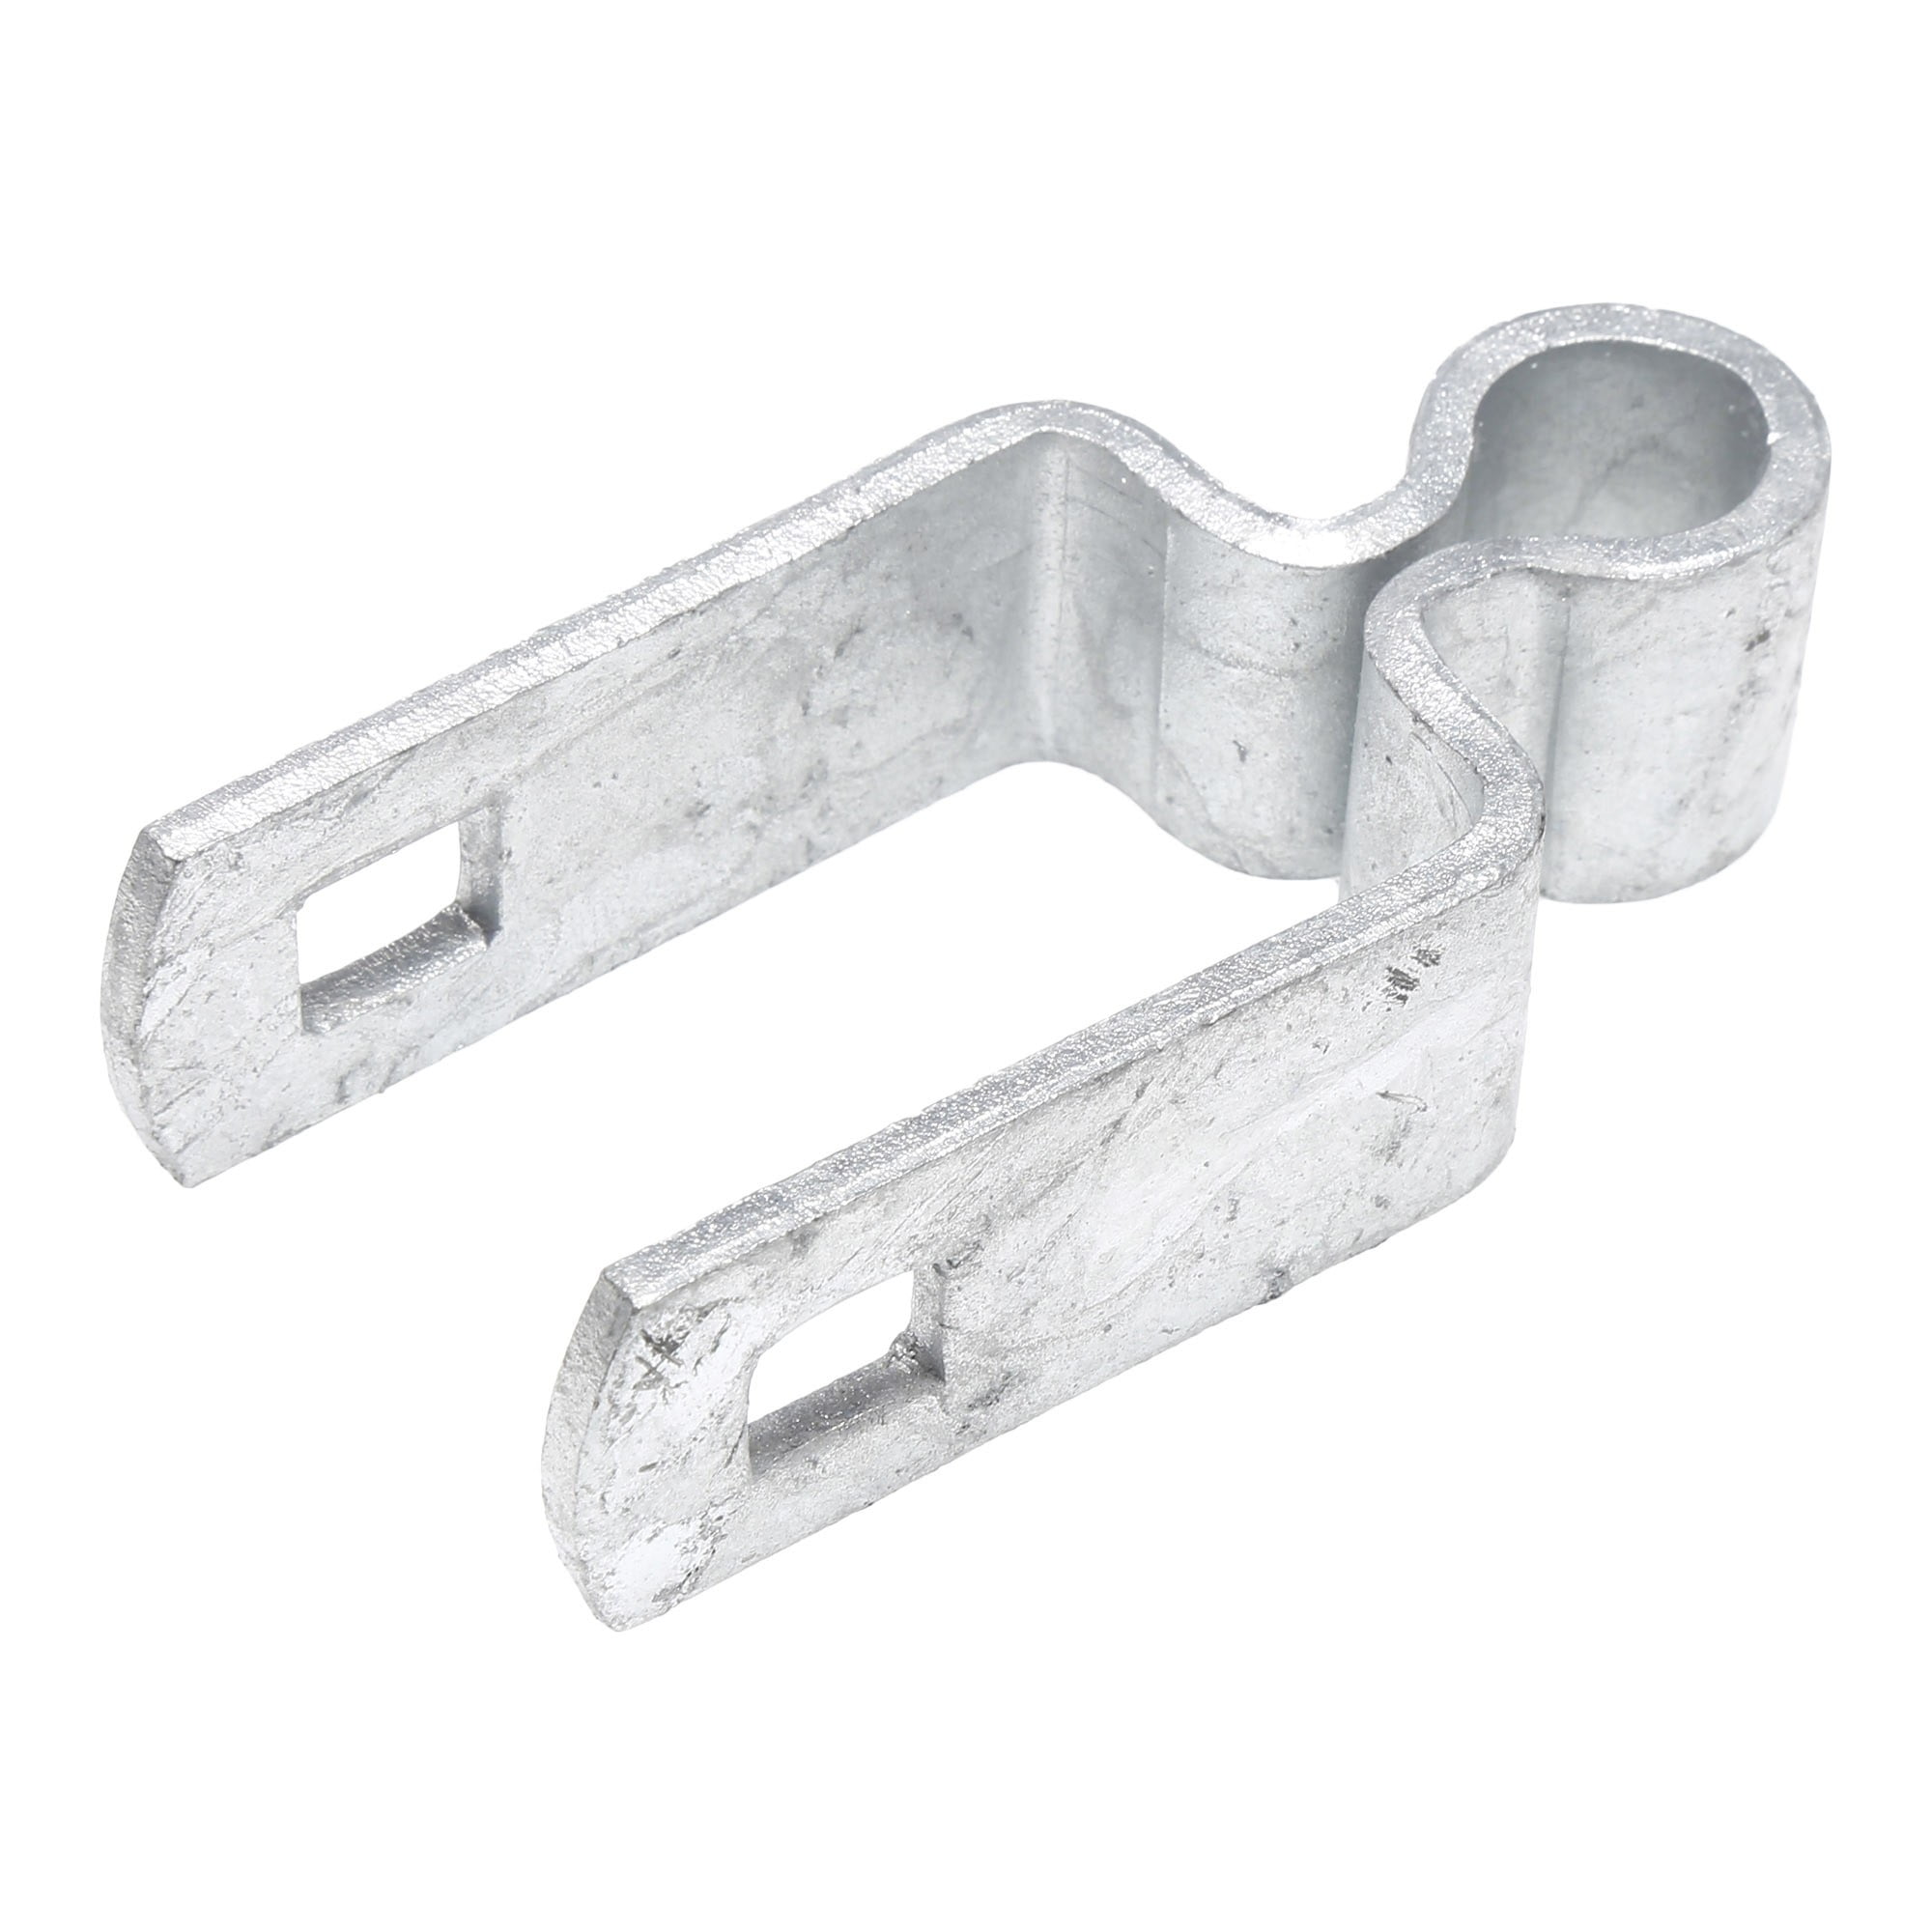 HEAVY DUTY STRAIGHT HOOK & BAND GATE HINGES HOT DIPPED GALVANISED FIXINGS 